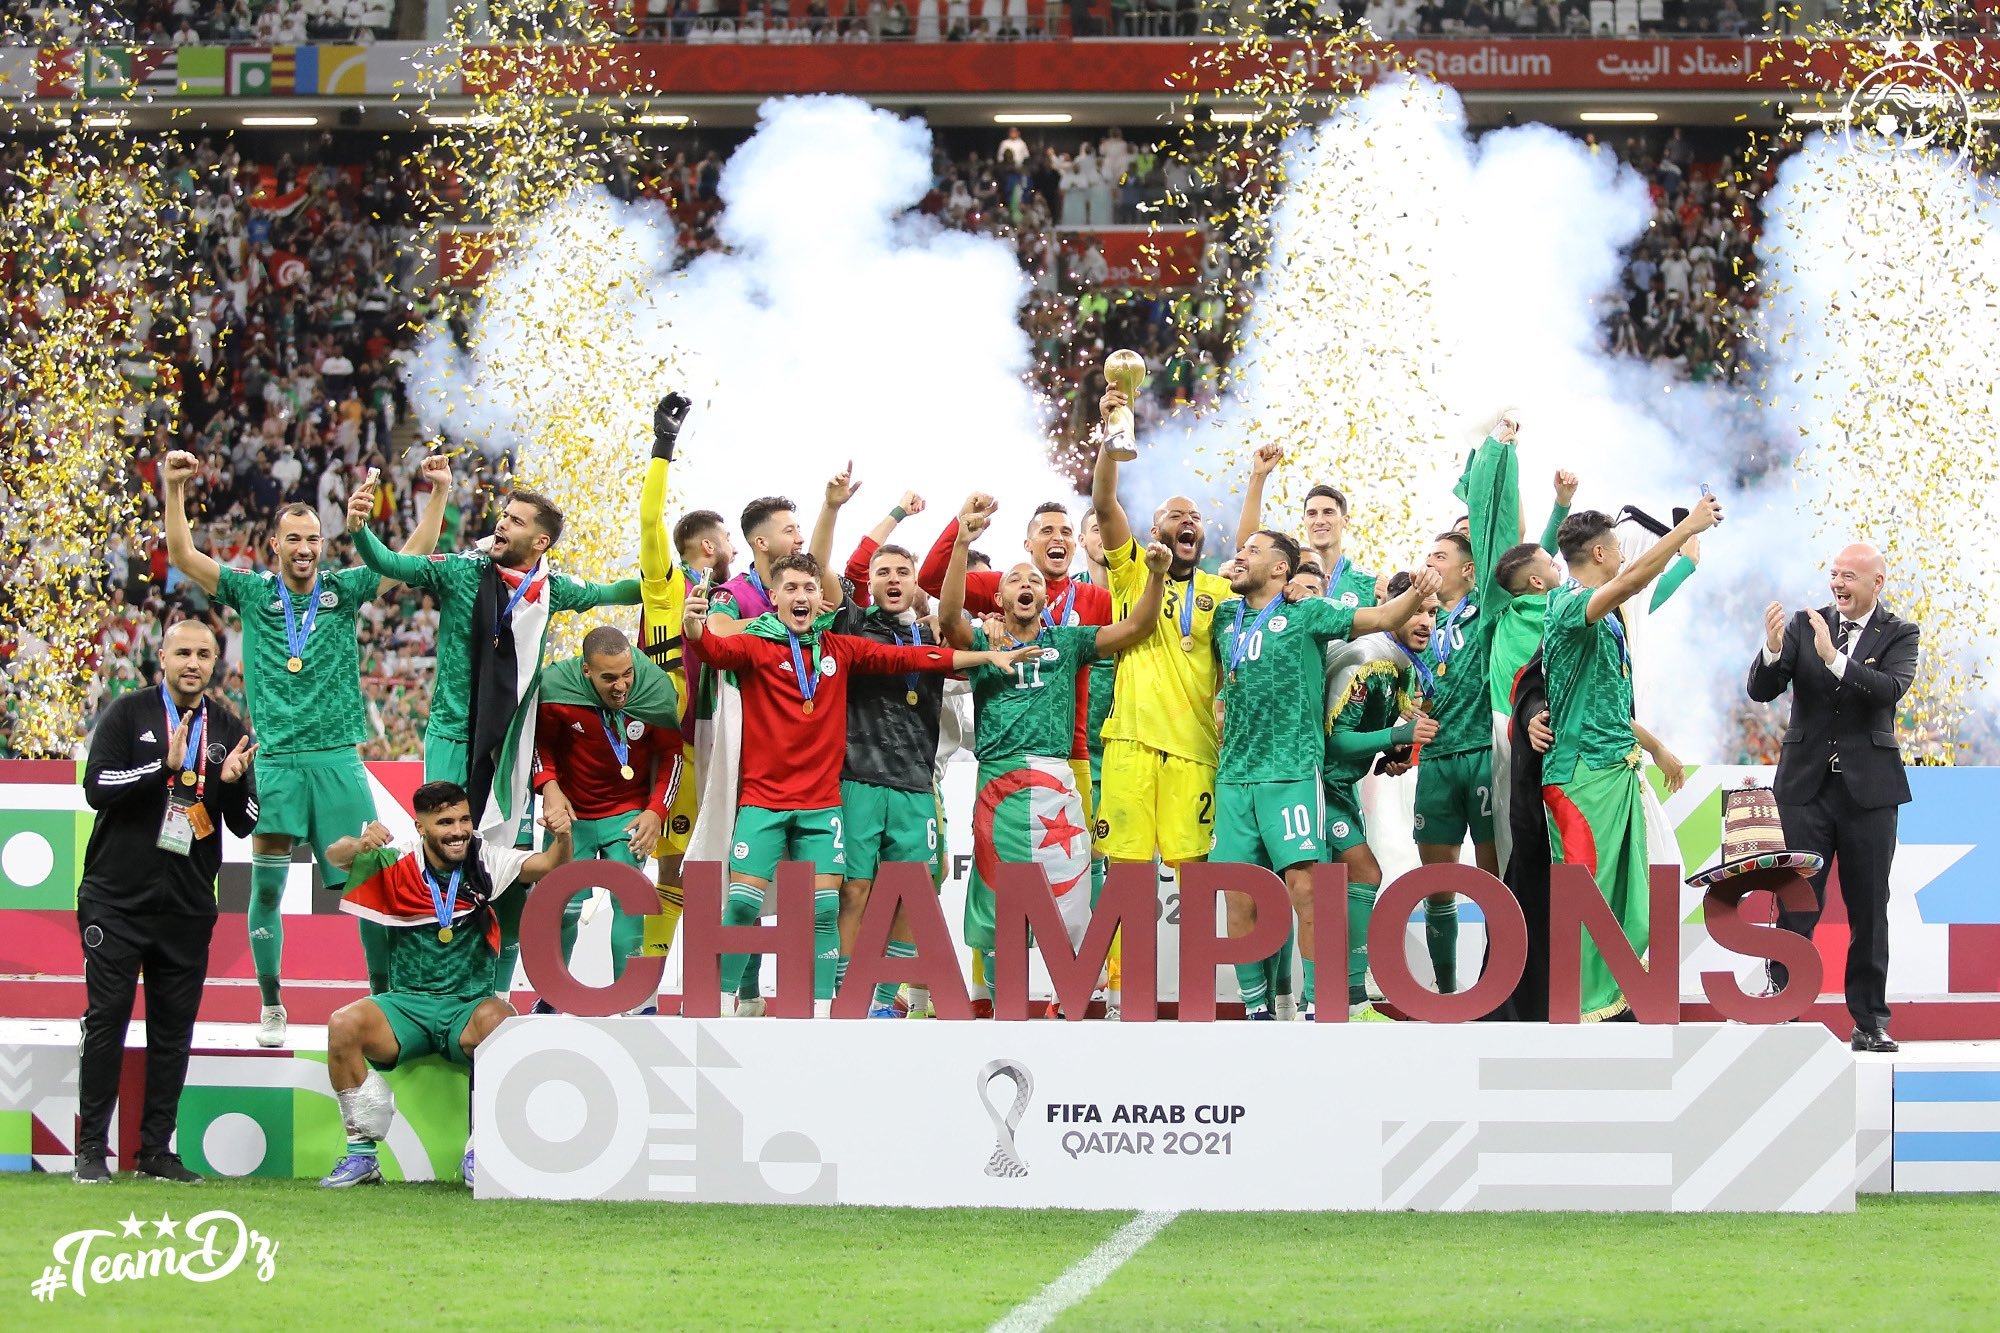 FIFA Arab Cup 2021 review Algeria win in Qatar in prelude to next years World Cup — BabaGol